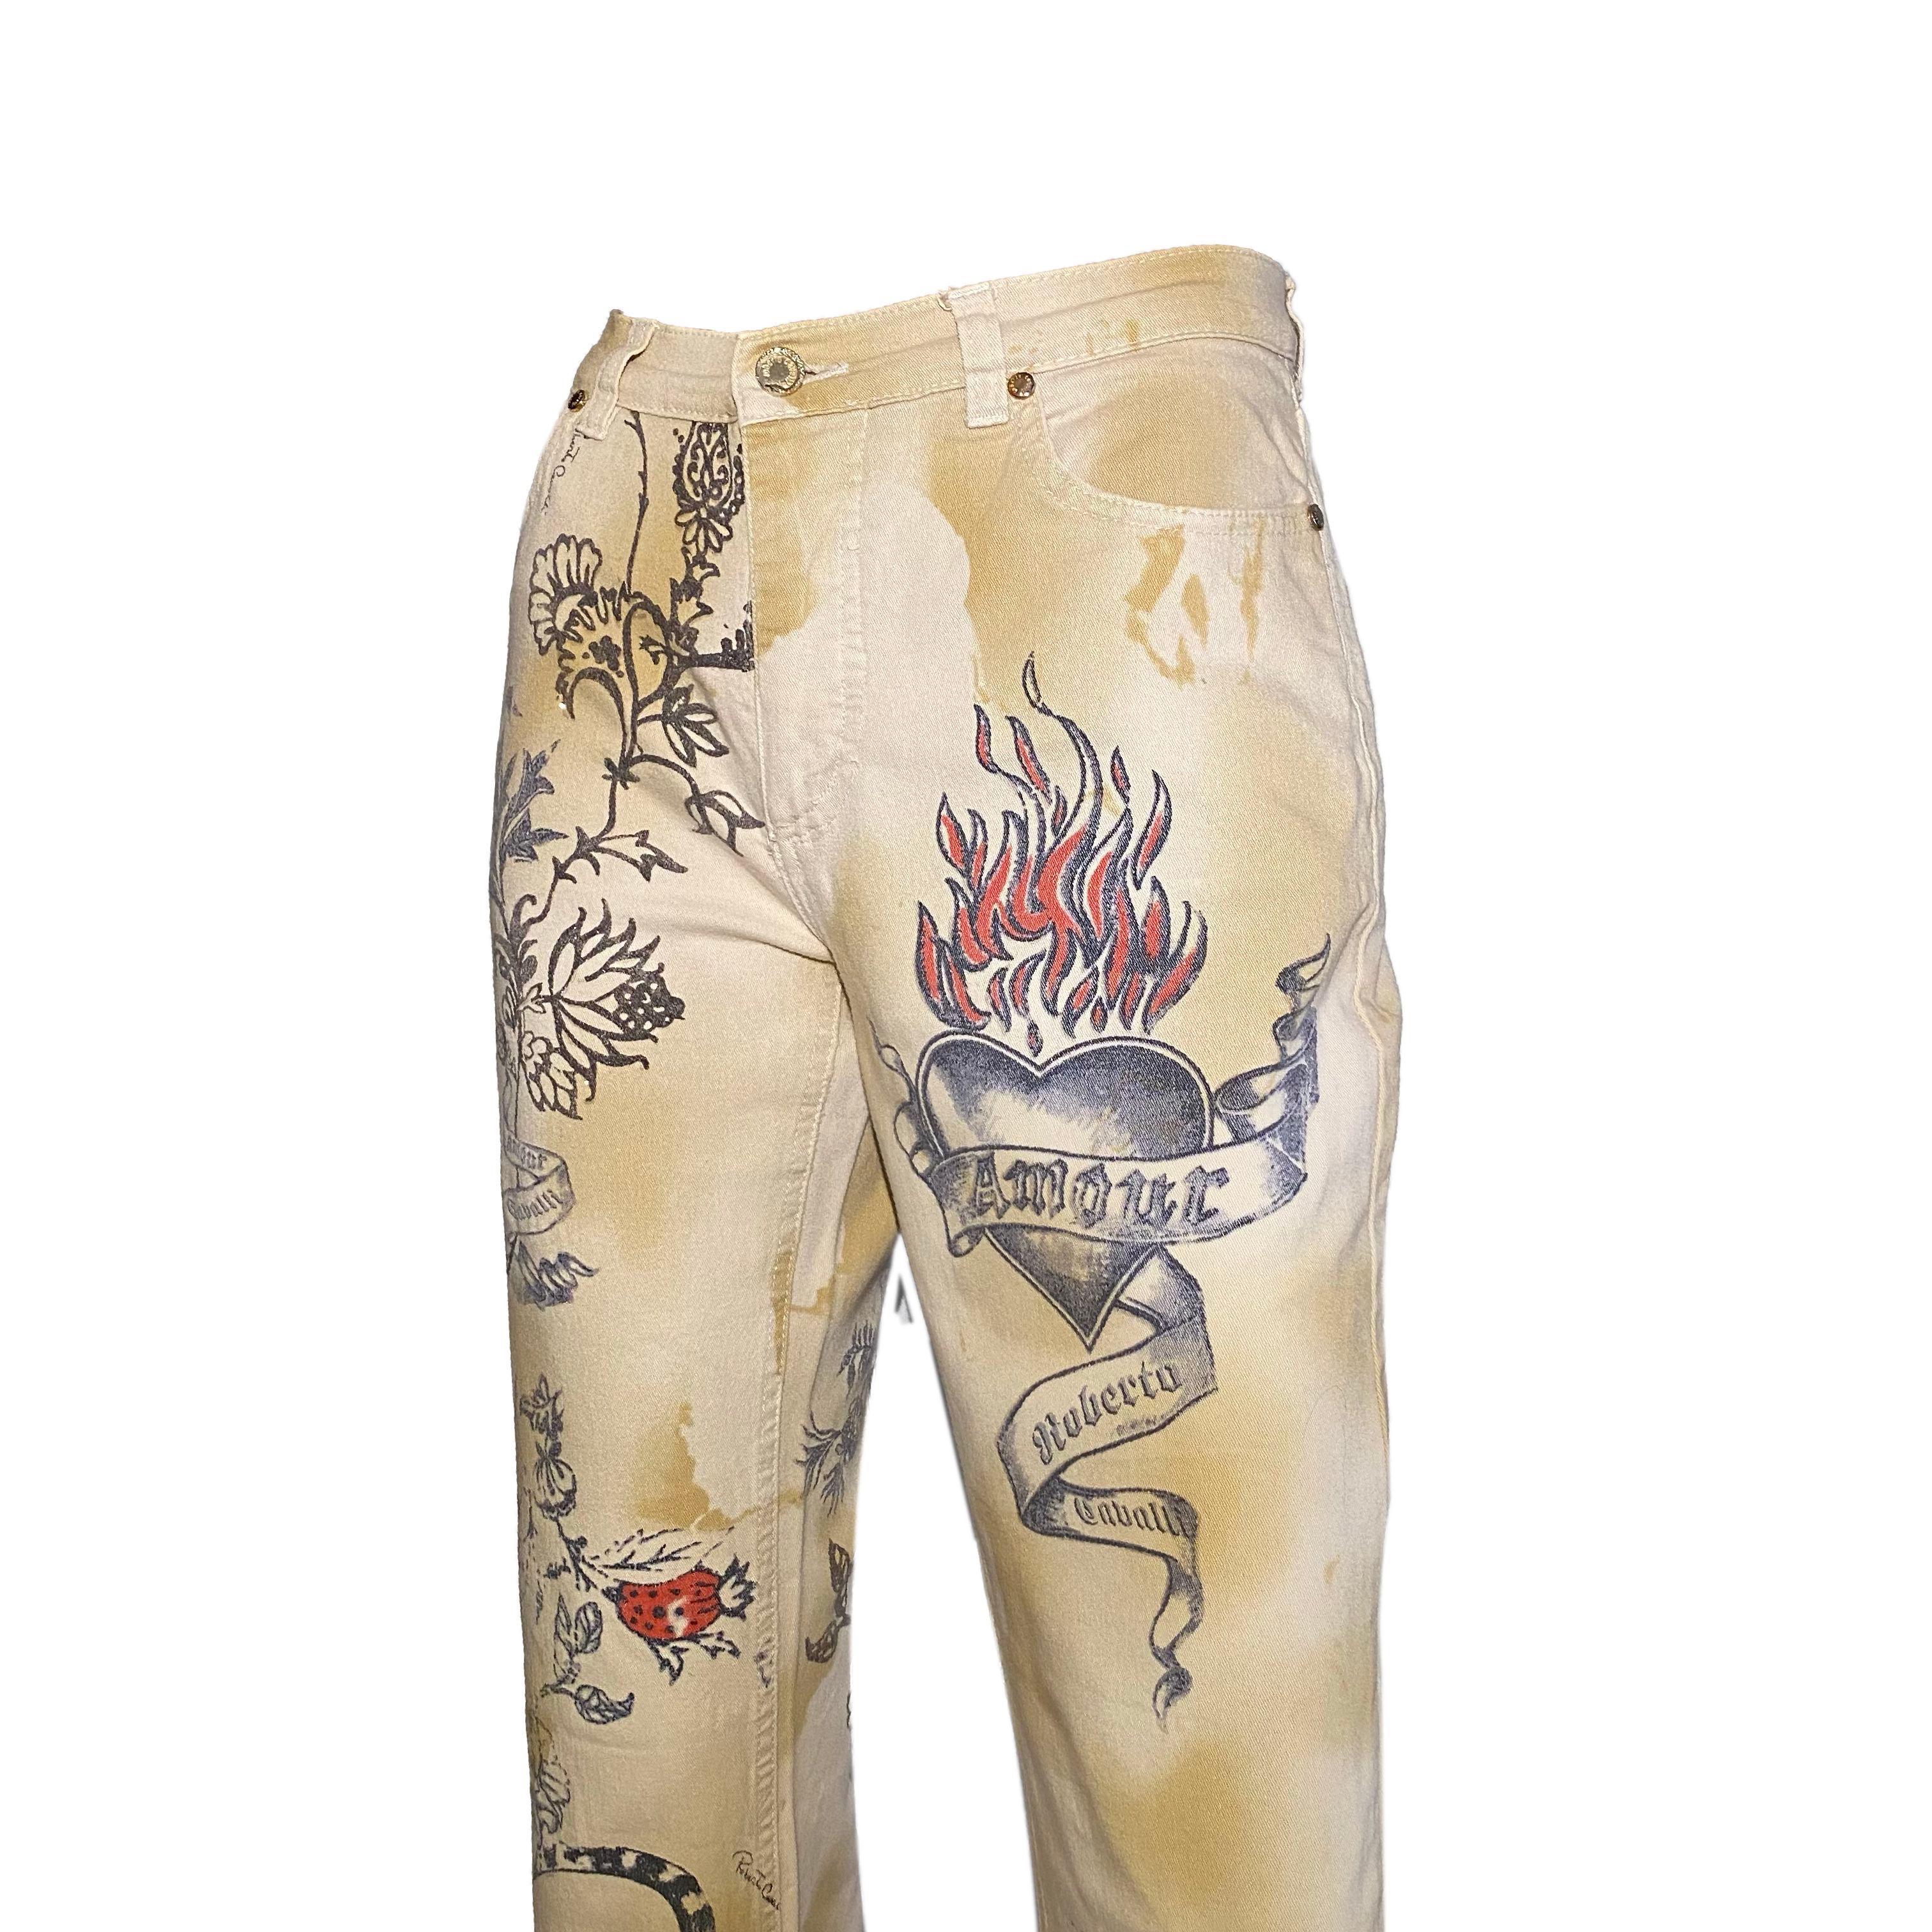 Roberto Cavalli beige/cream jeans with old-school style tattoo print from the Spring/Summer 2003 collection. 

Size label missing, fits S/M

Waistline: 75 cm / 29.5 inch
Inseam: 76 cm / 29.9 inch
Outseam: 102 cm / 40.1 inch